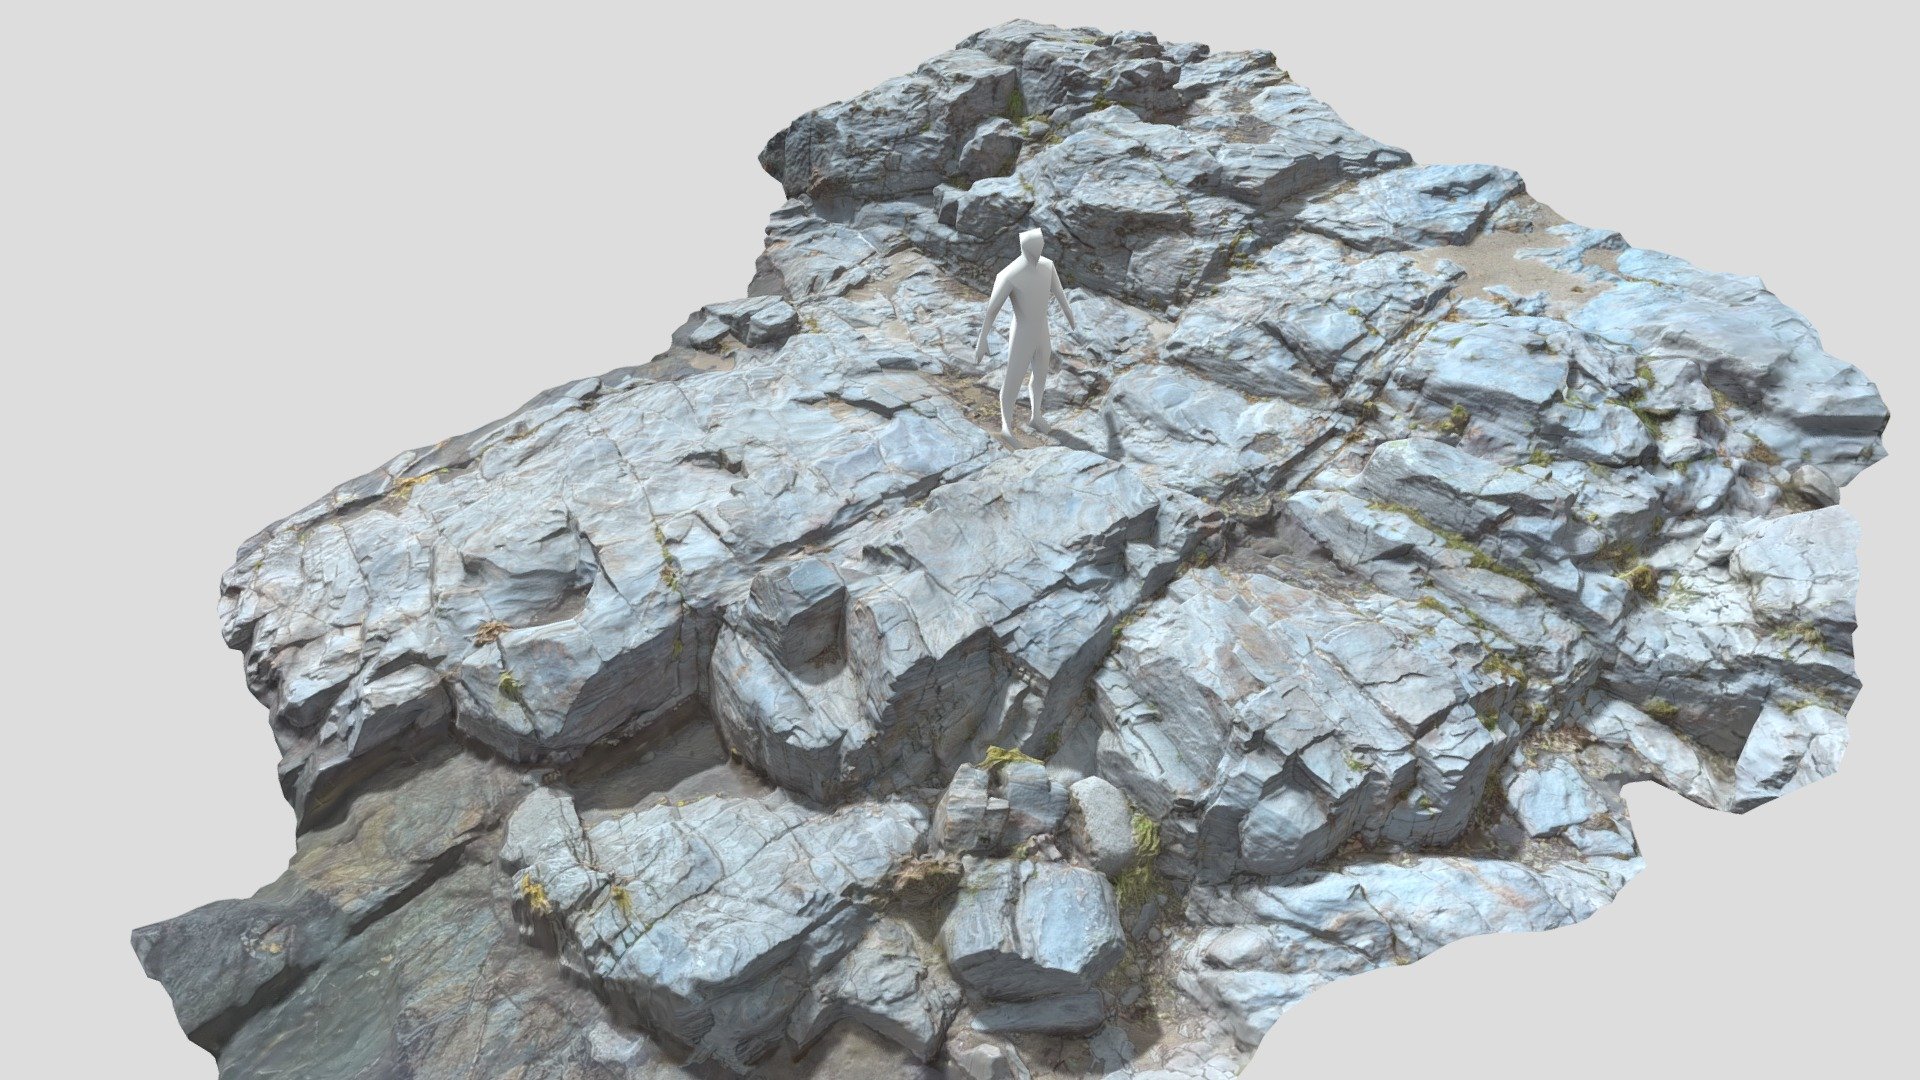 Fully processed 3D scans: no light information, color-matched, etc. 

Ready to use for all kind of CGI

Source Contains:





.blend




.obj




.fbx



8K Textures for each model:





normal




albedo




roughness



Please let me know if something isn’t working as it should.

Realistic River Cliff Rocks Scan - River Cliff Rocks Scan - Buy Royalty Free 3D model by Per's Scan Collection (@perz_scans) 3d model